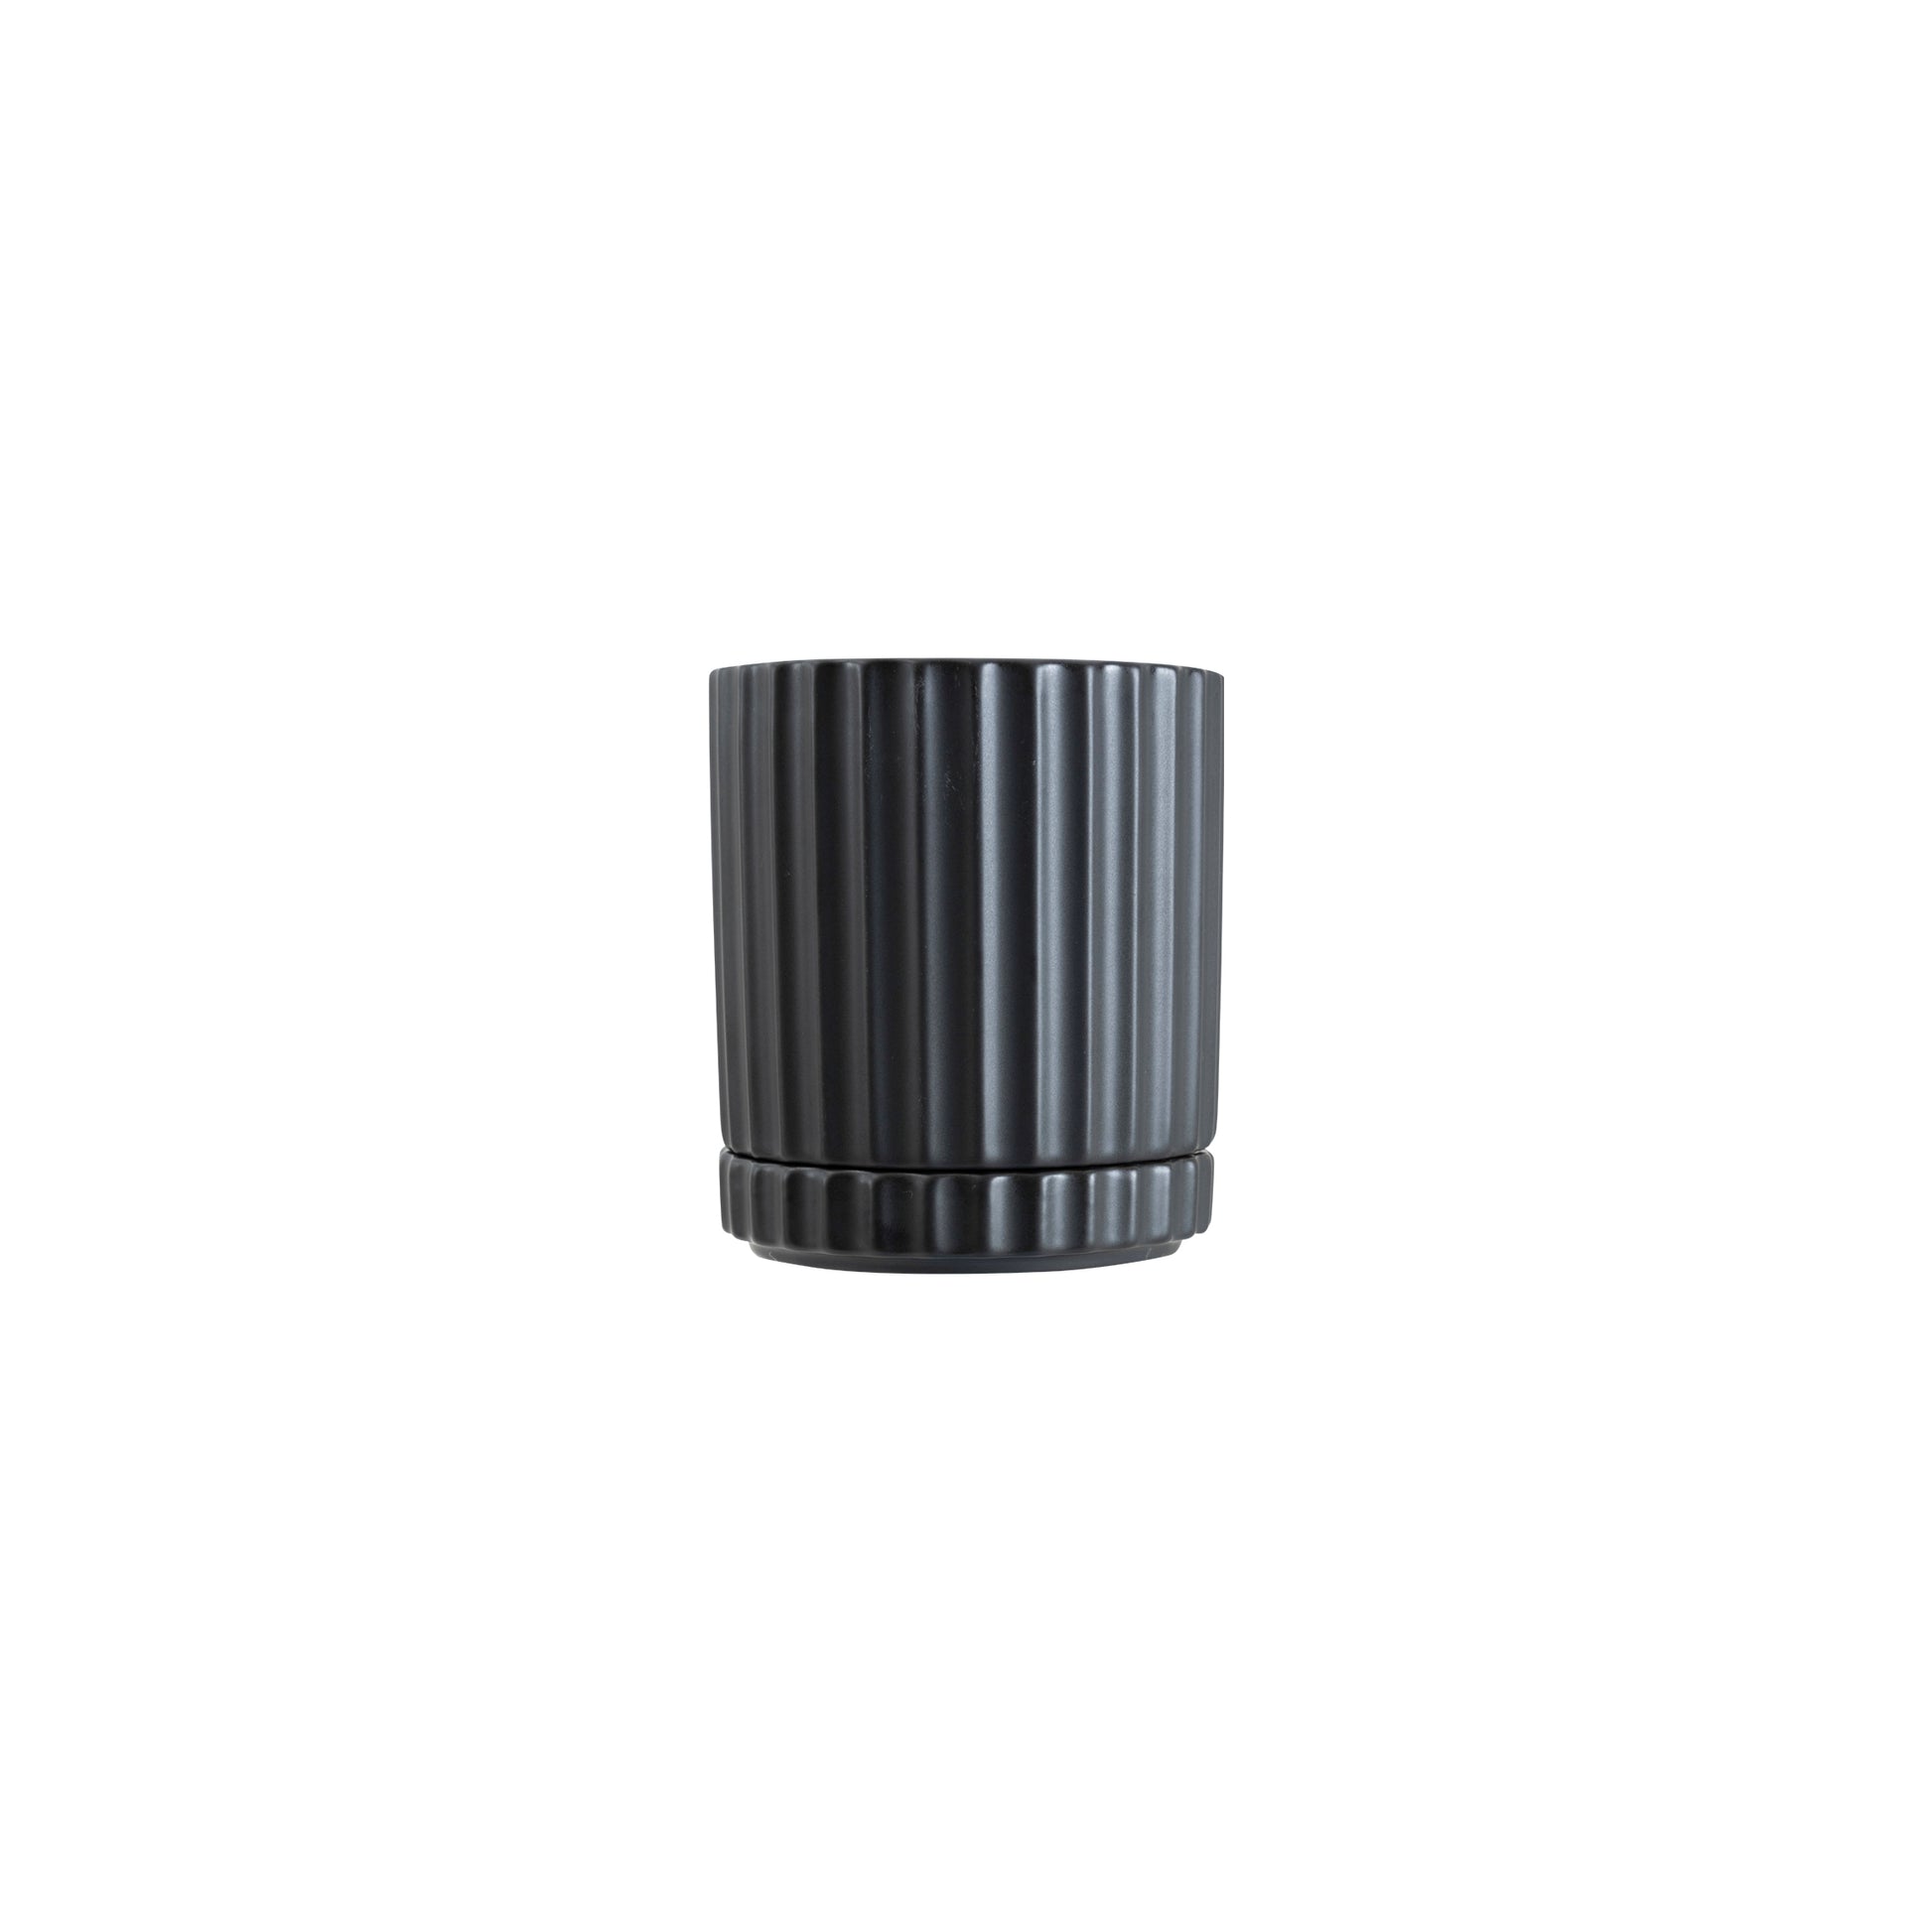 Inspired by the pillars at the Acropolis, the Athens planter in black combines classic style with the functionality of a drainage hole and matching saucer.   Mix and match plant pots to add personality and greenery to any space.  Colour: black   Dimensions: 10cm internal diameter x 13.5cm high